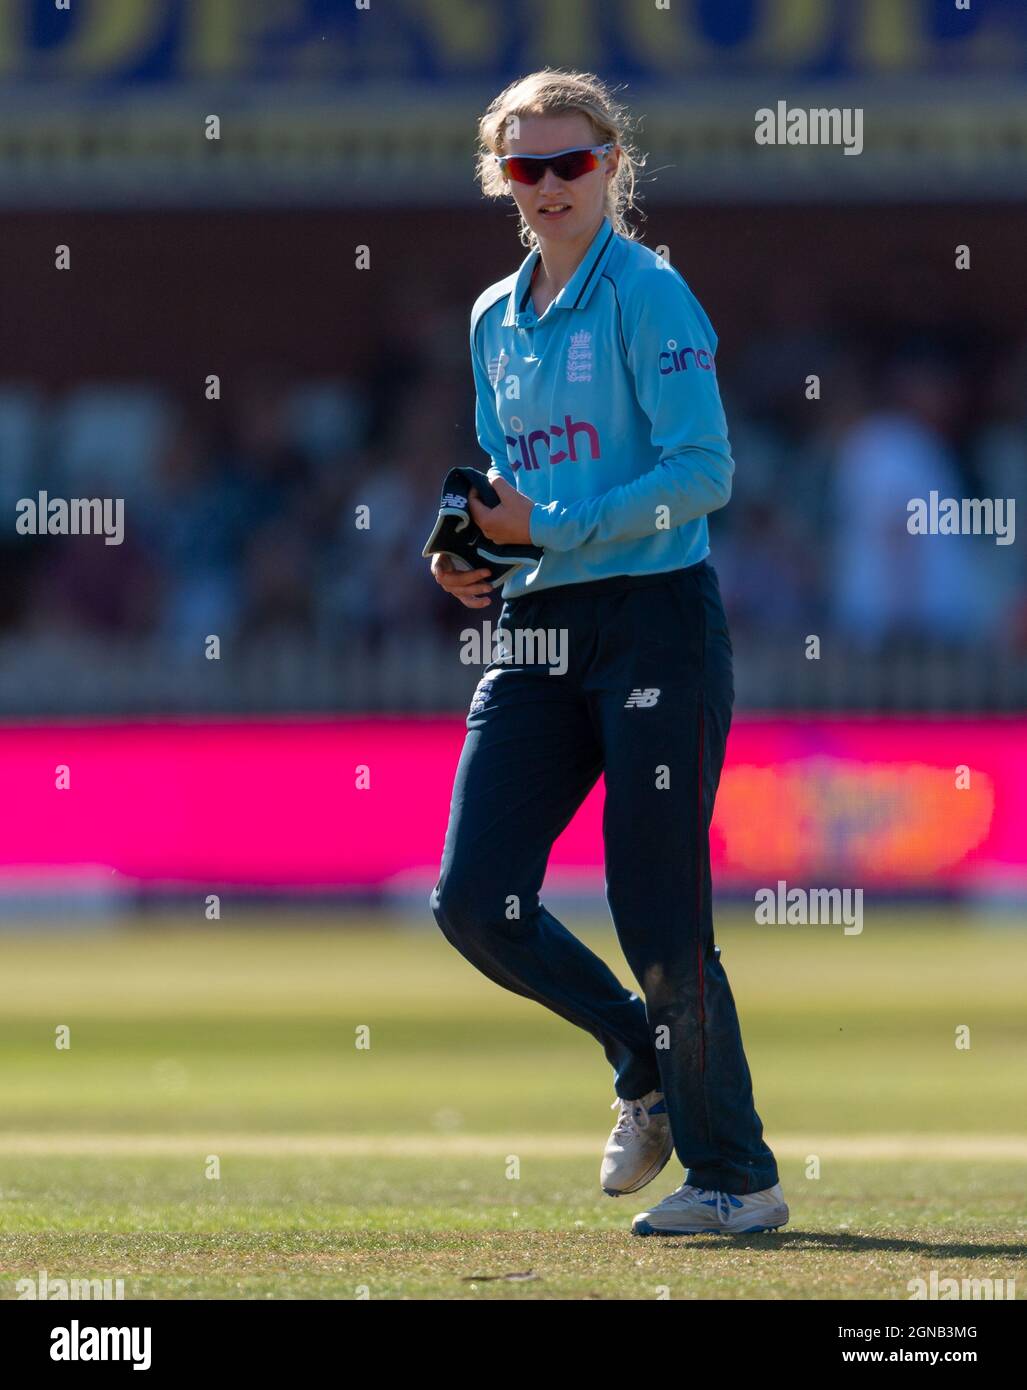 England's Charlie Dean during the 4th Women's One Day International against New Zealand Stock Photo